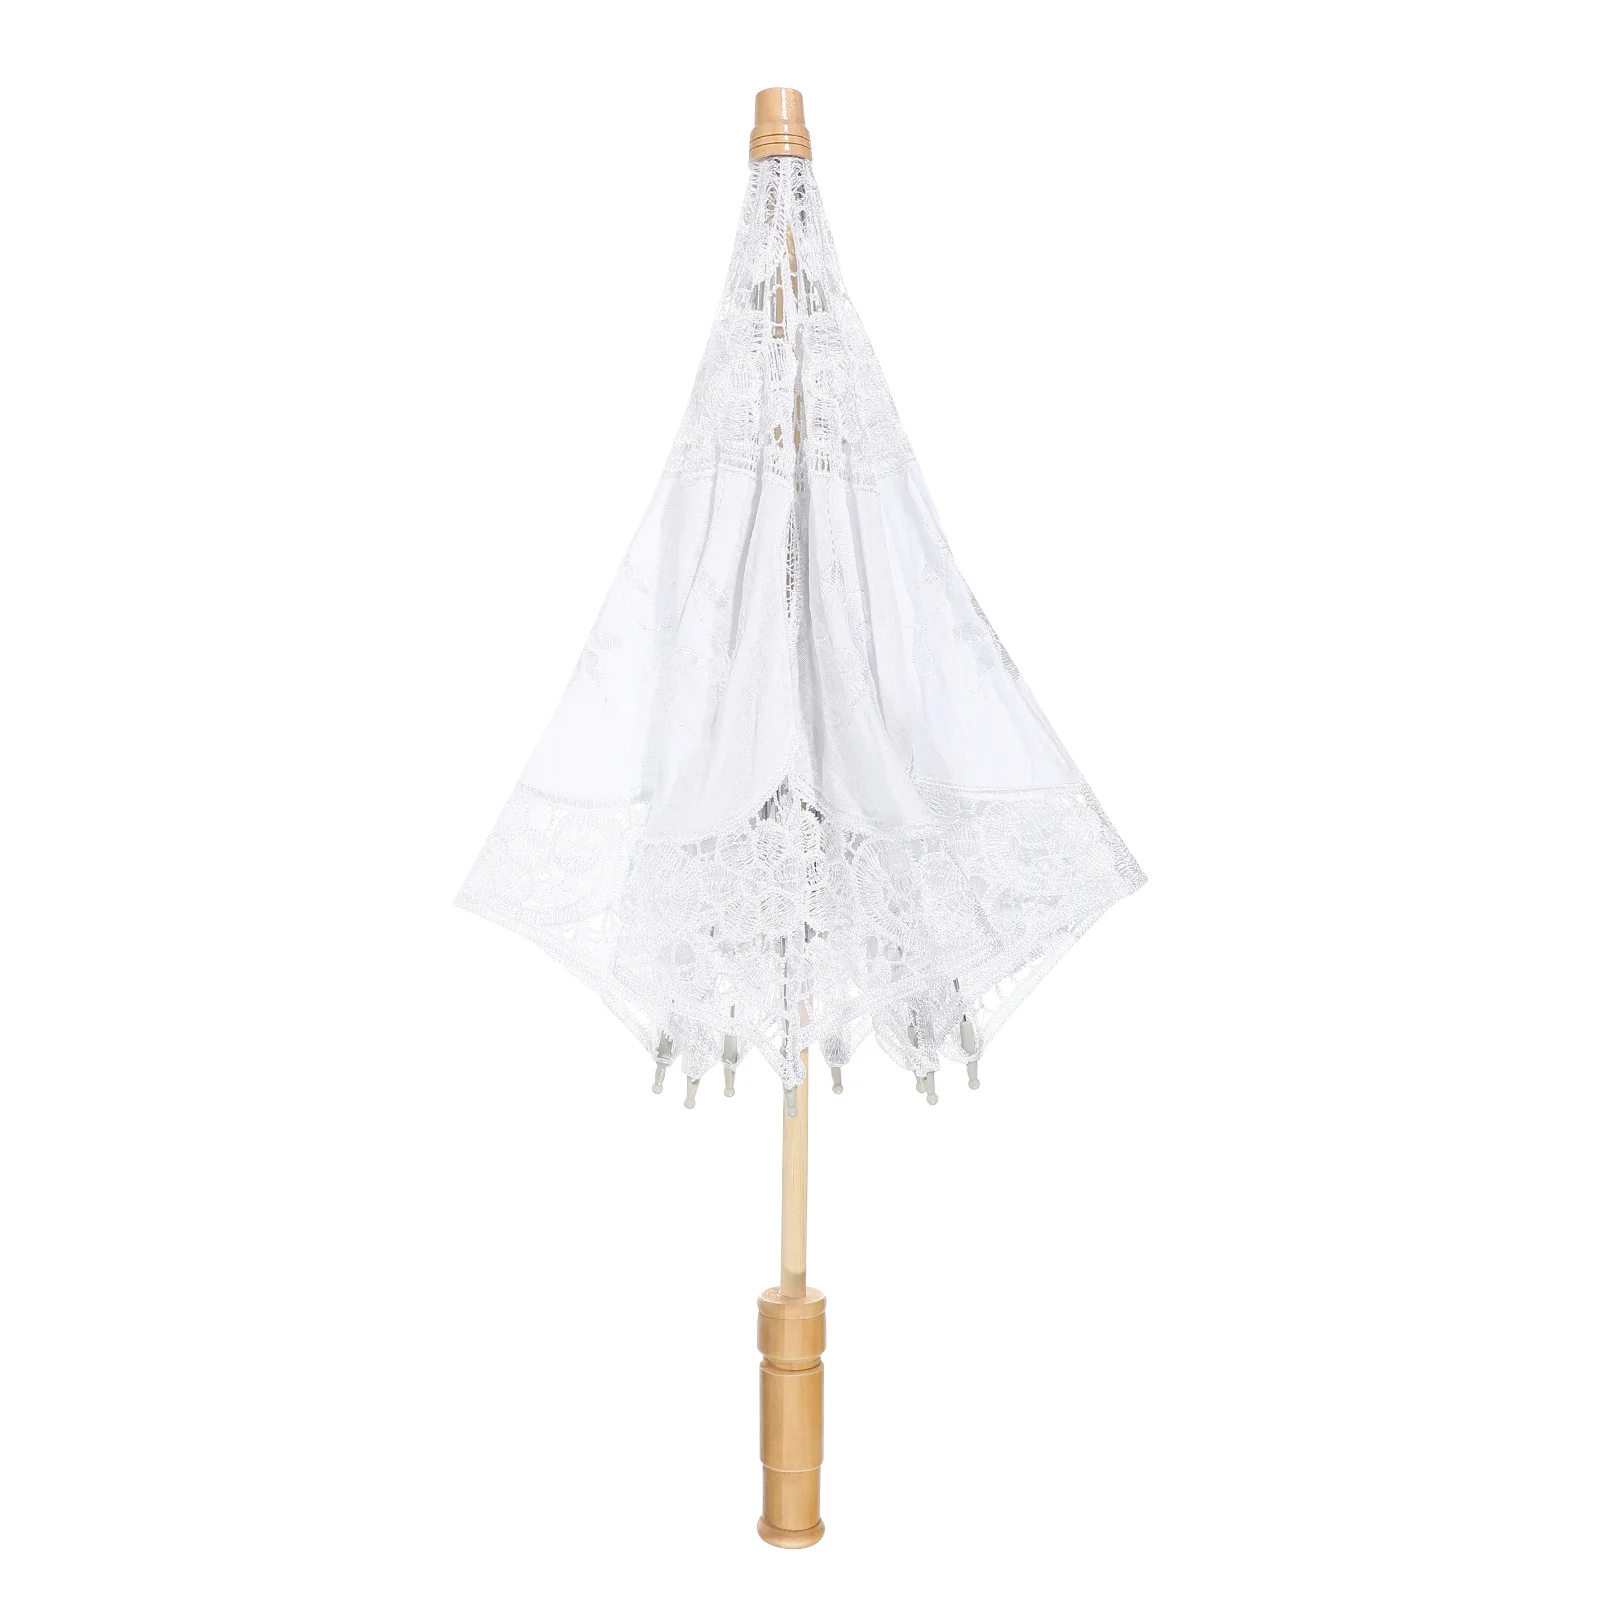 

Gift Umbrella Bride Lace Embroidered Parasol Handheld Photography Prop Wooden Handle Handmade Pastoral Decorative Clear Wedding